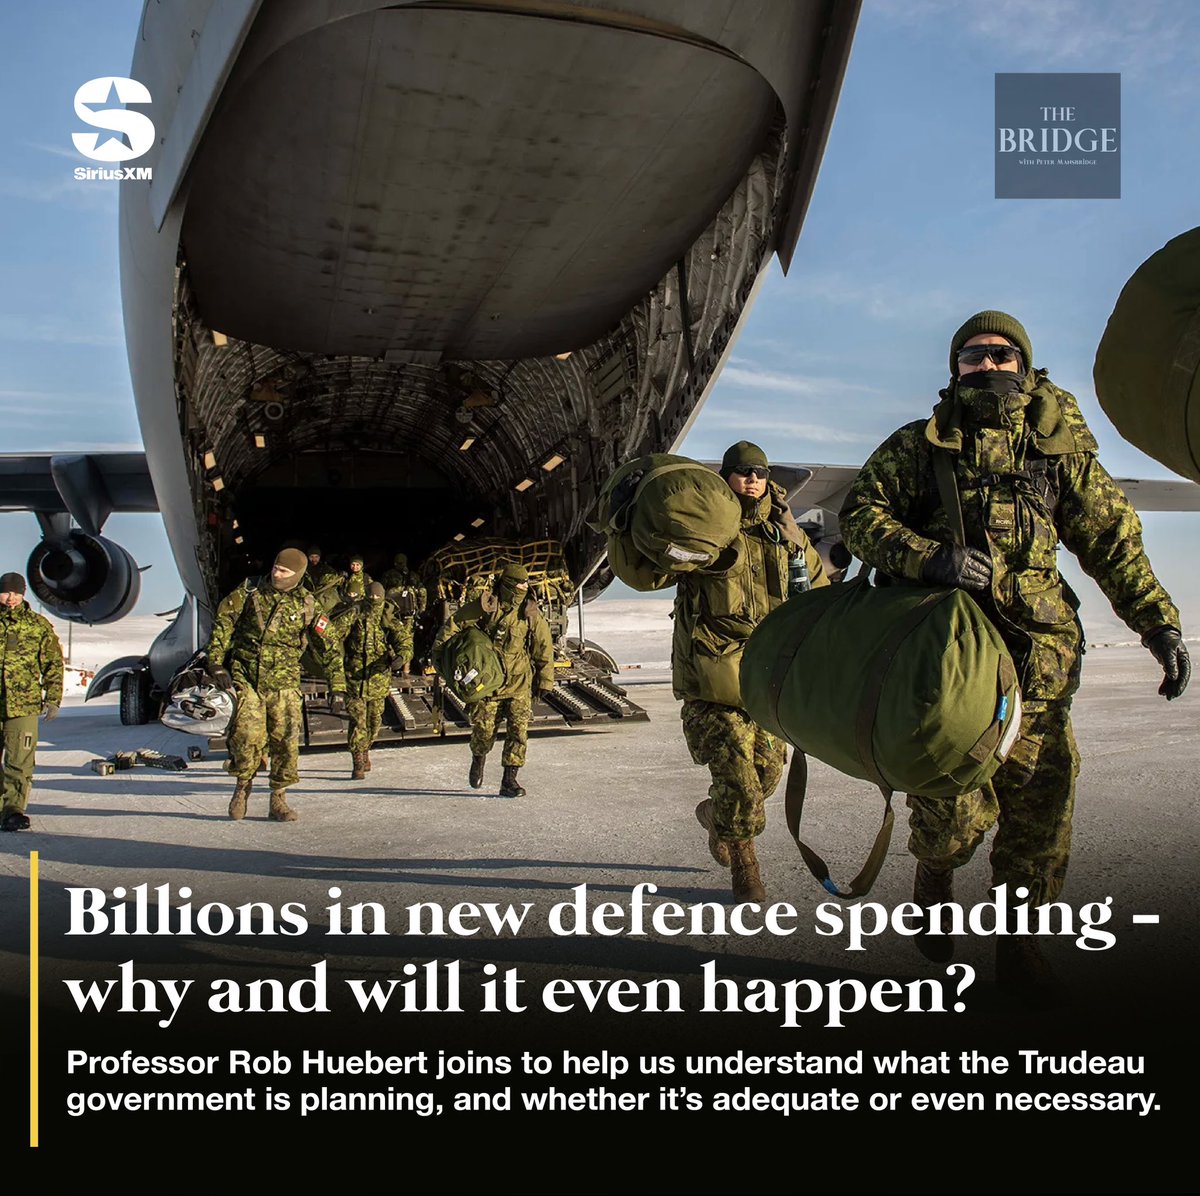 The latest round of billion dollar promises from the Trudeau government is directed at improving Canada's defence system, especially in Canada's arctic. Professor Rob Huebert joins to discuss. Noon EST on @CanadaTalks167, and all podcast platforms.